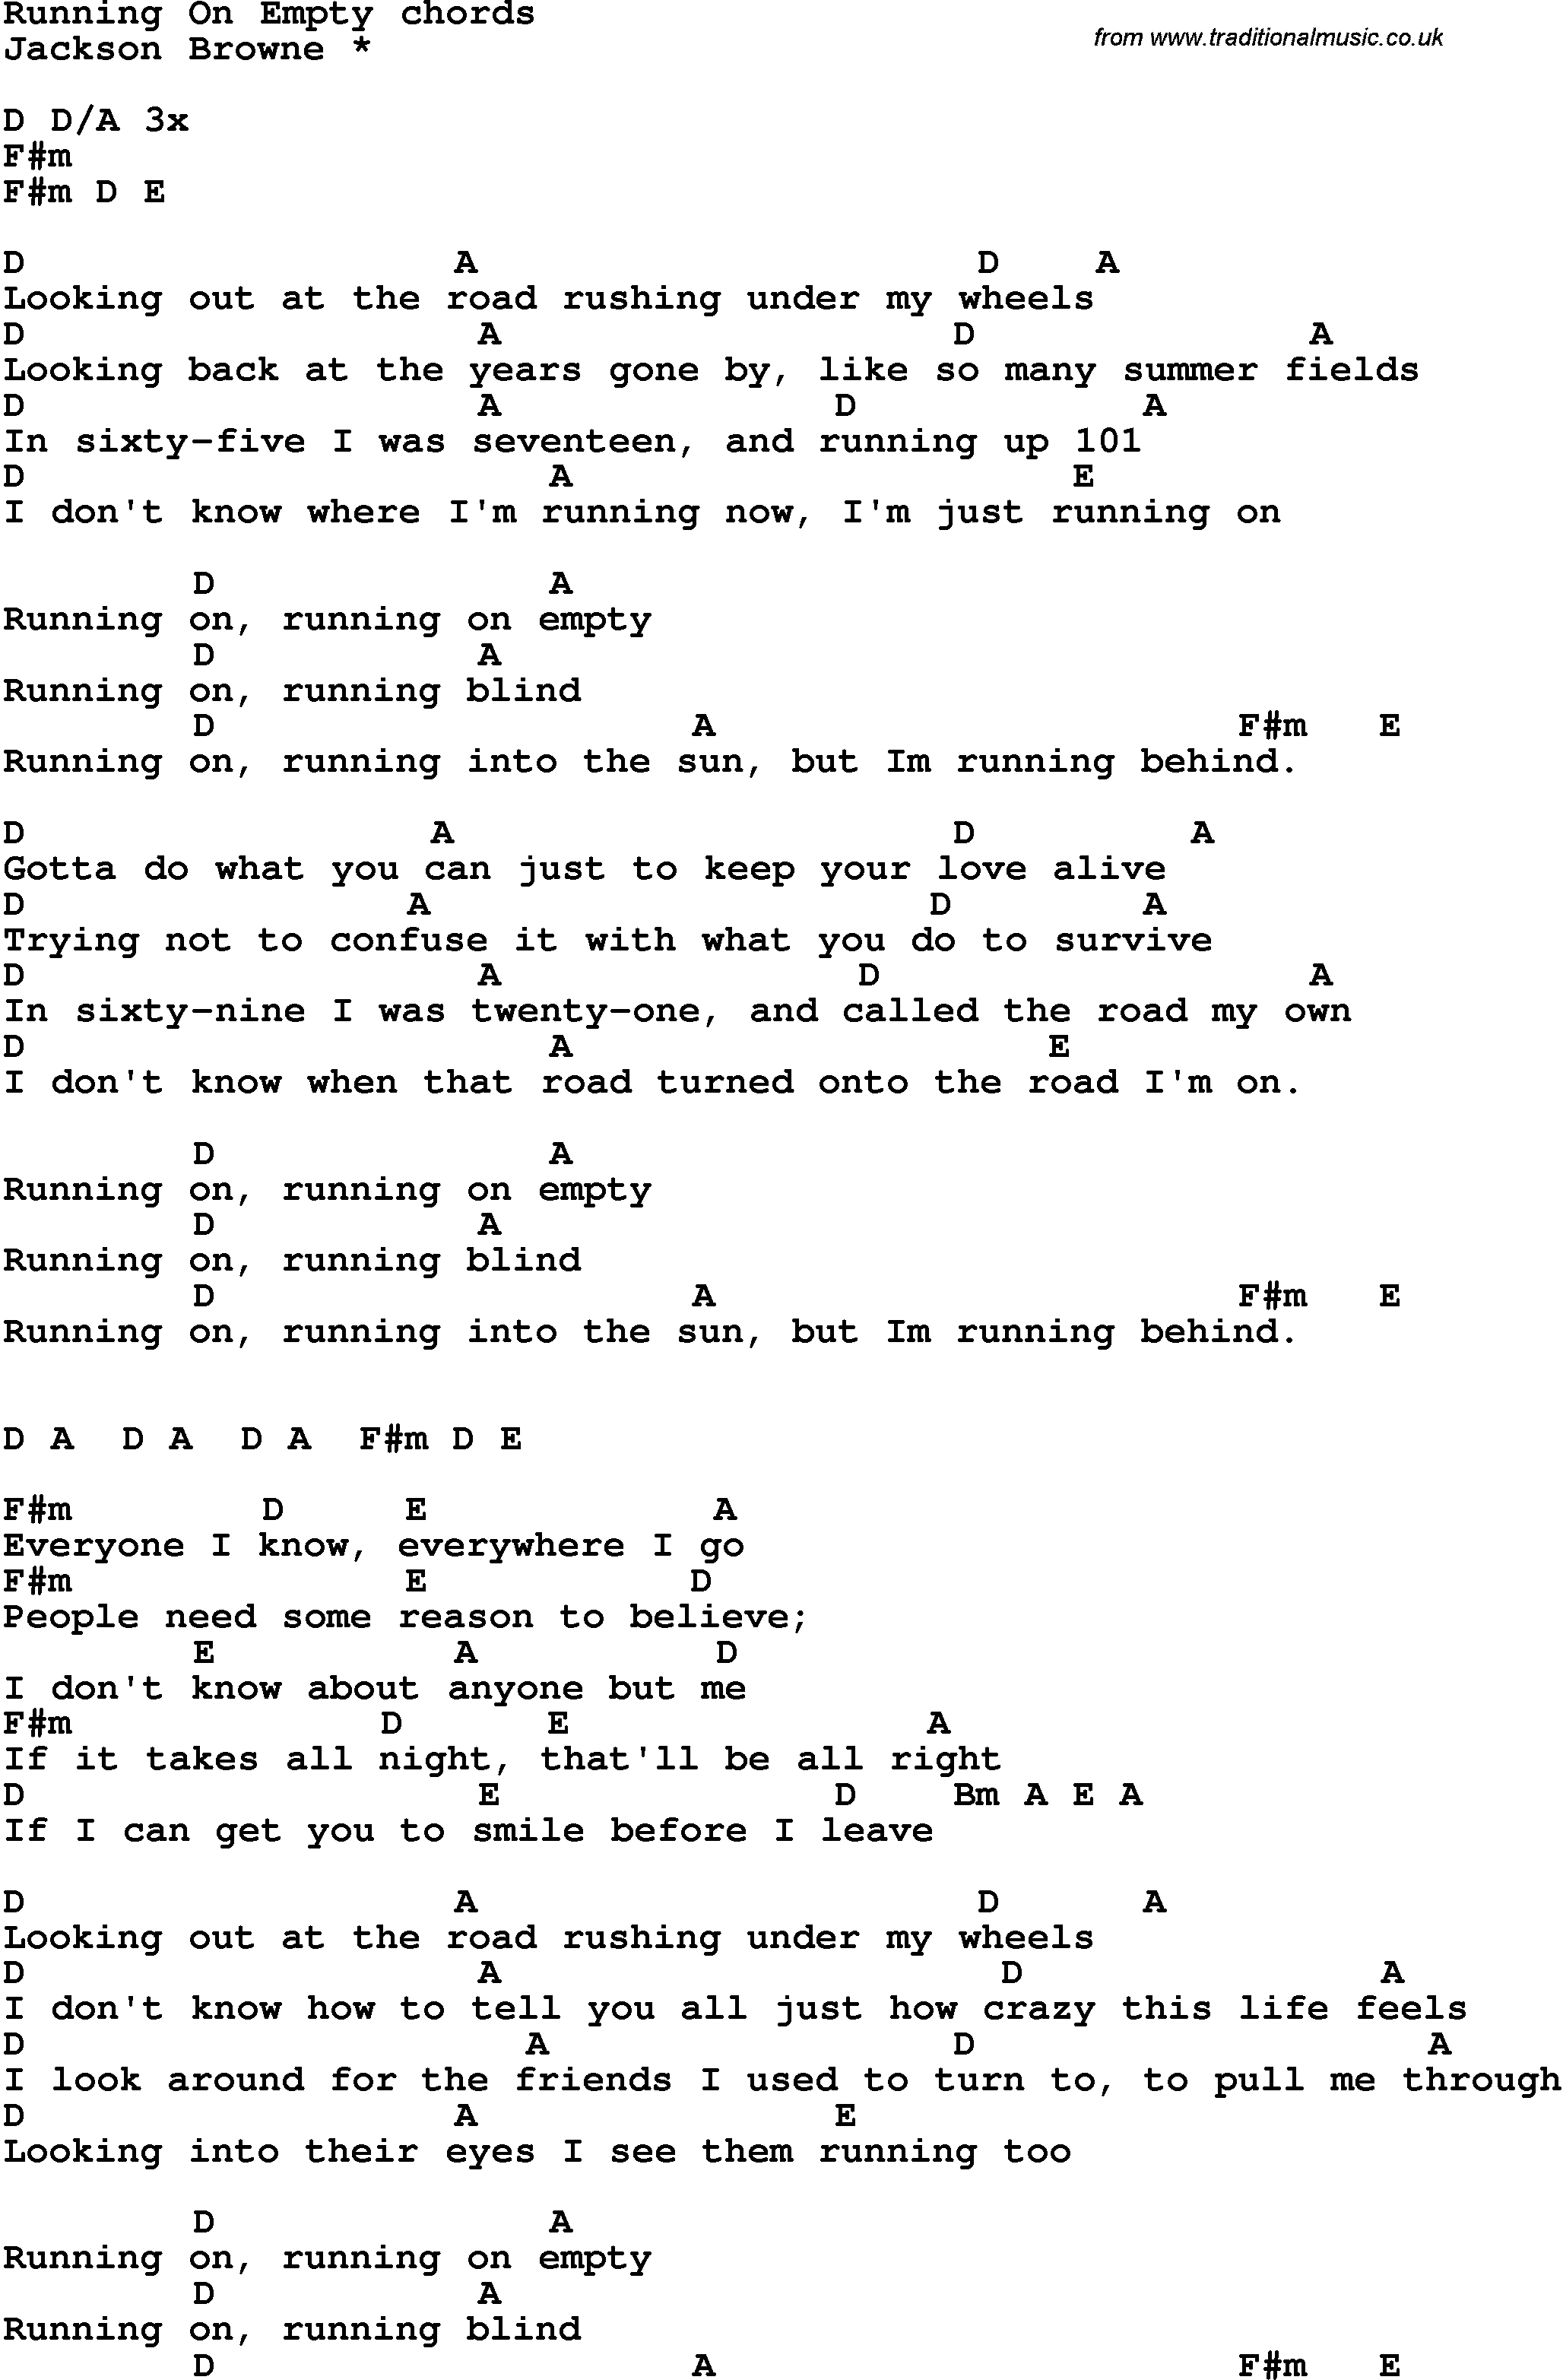 Song Lyrics with guitar chords for Running On Empty